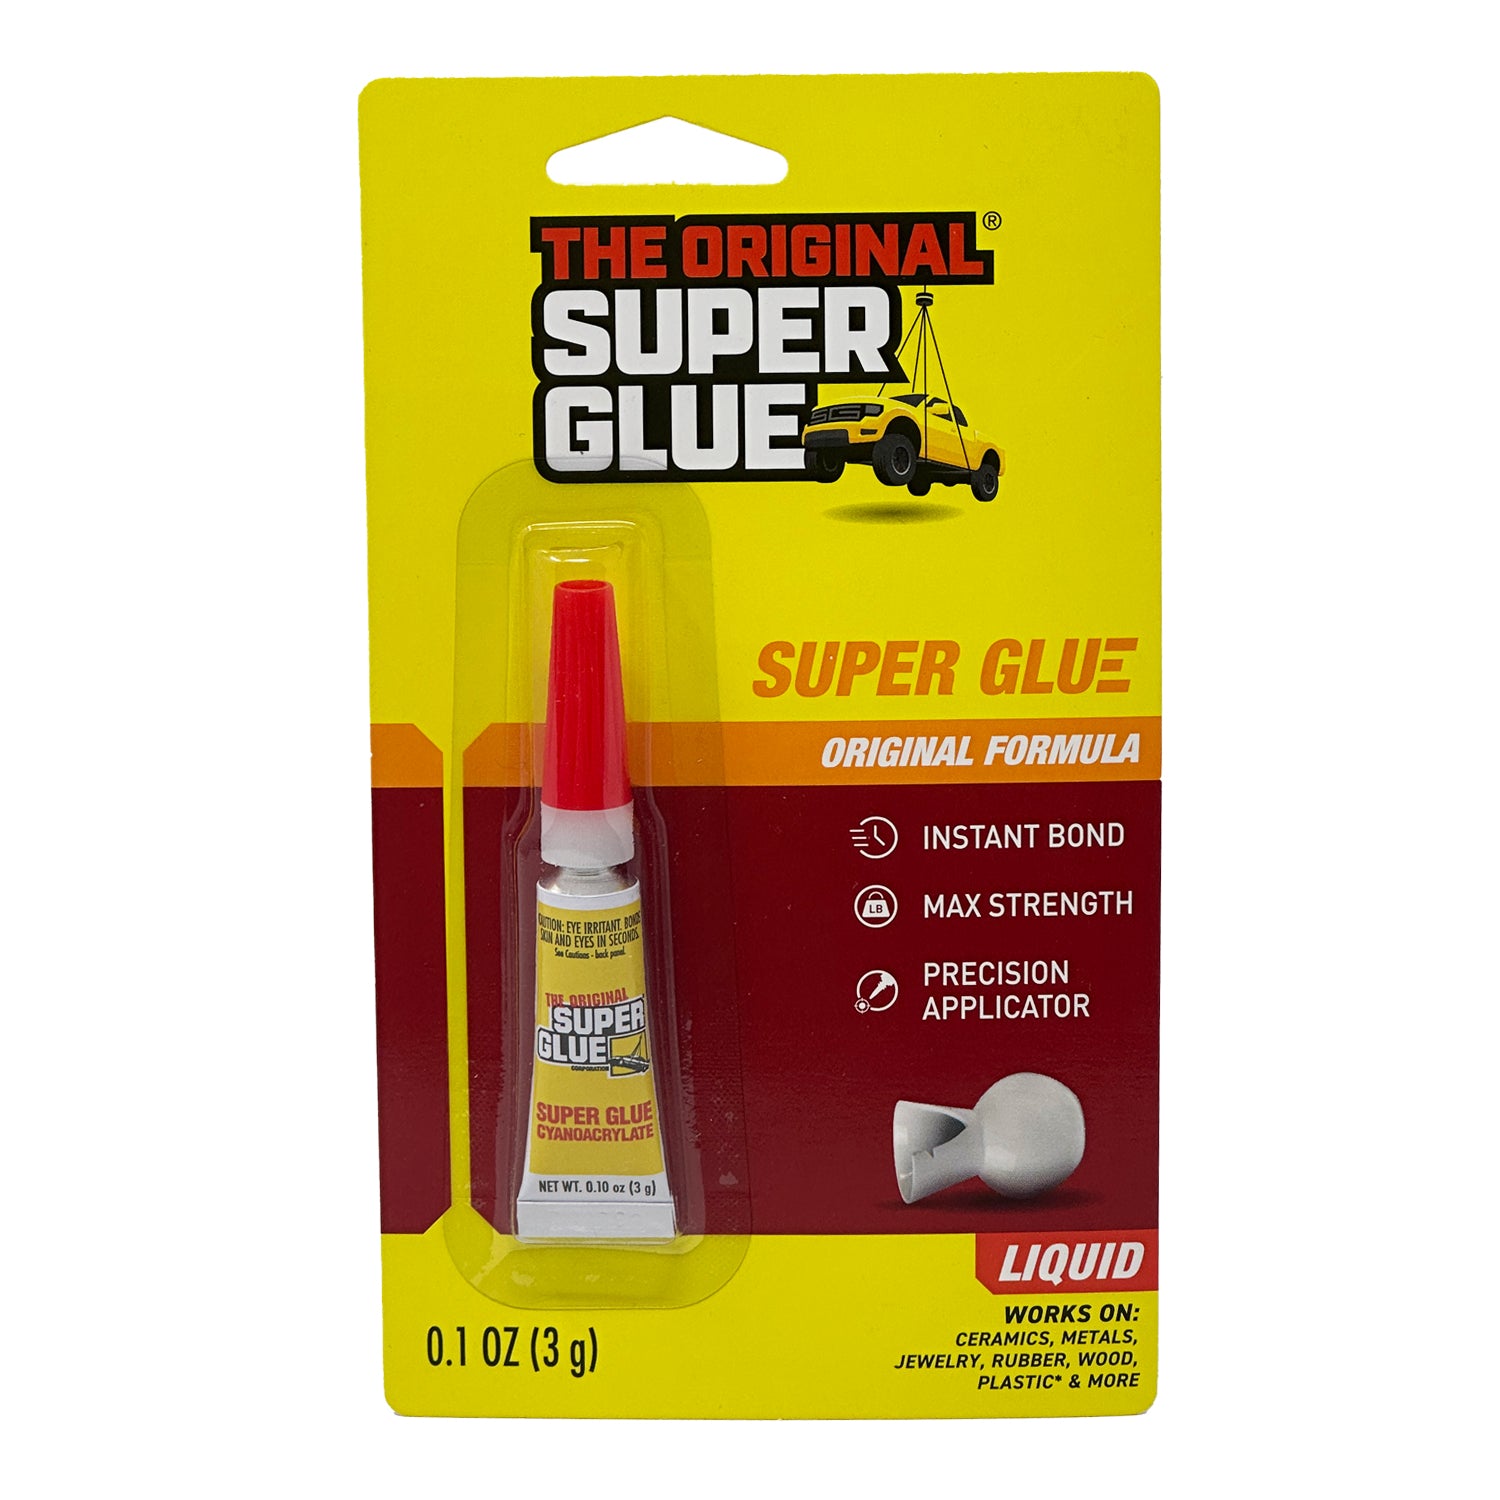 Super Glue Original Formula, 0.1 OZ - Clear Glue for Plastic, Wood, Ceramic  Glue Repair - Heavy Duty, Strong Adhesive - Multipurpose Super Glue for  Rubber, Shoes and More by GOSO Direct